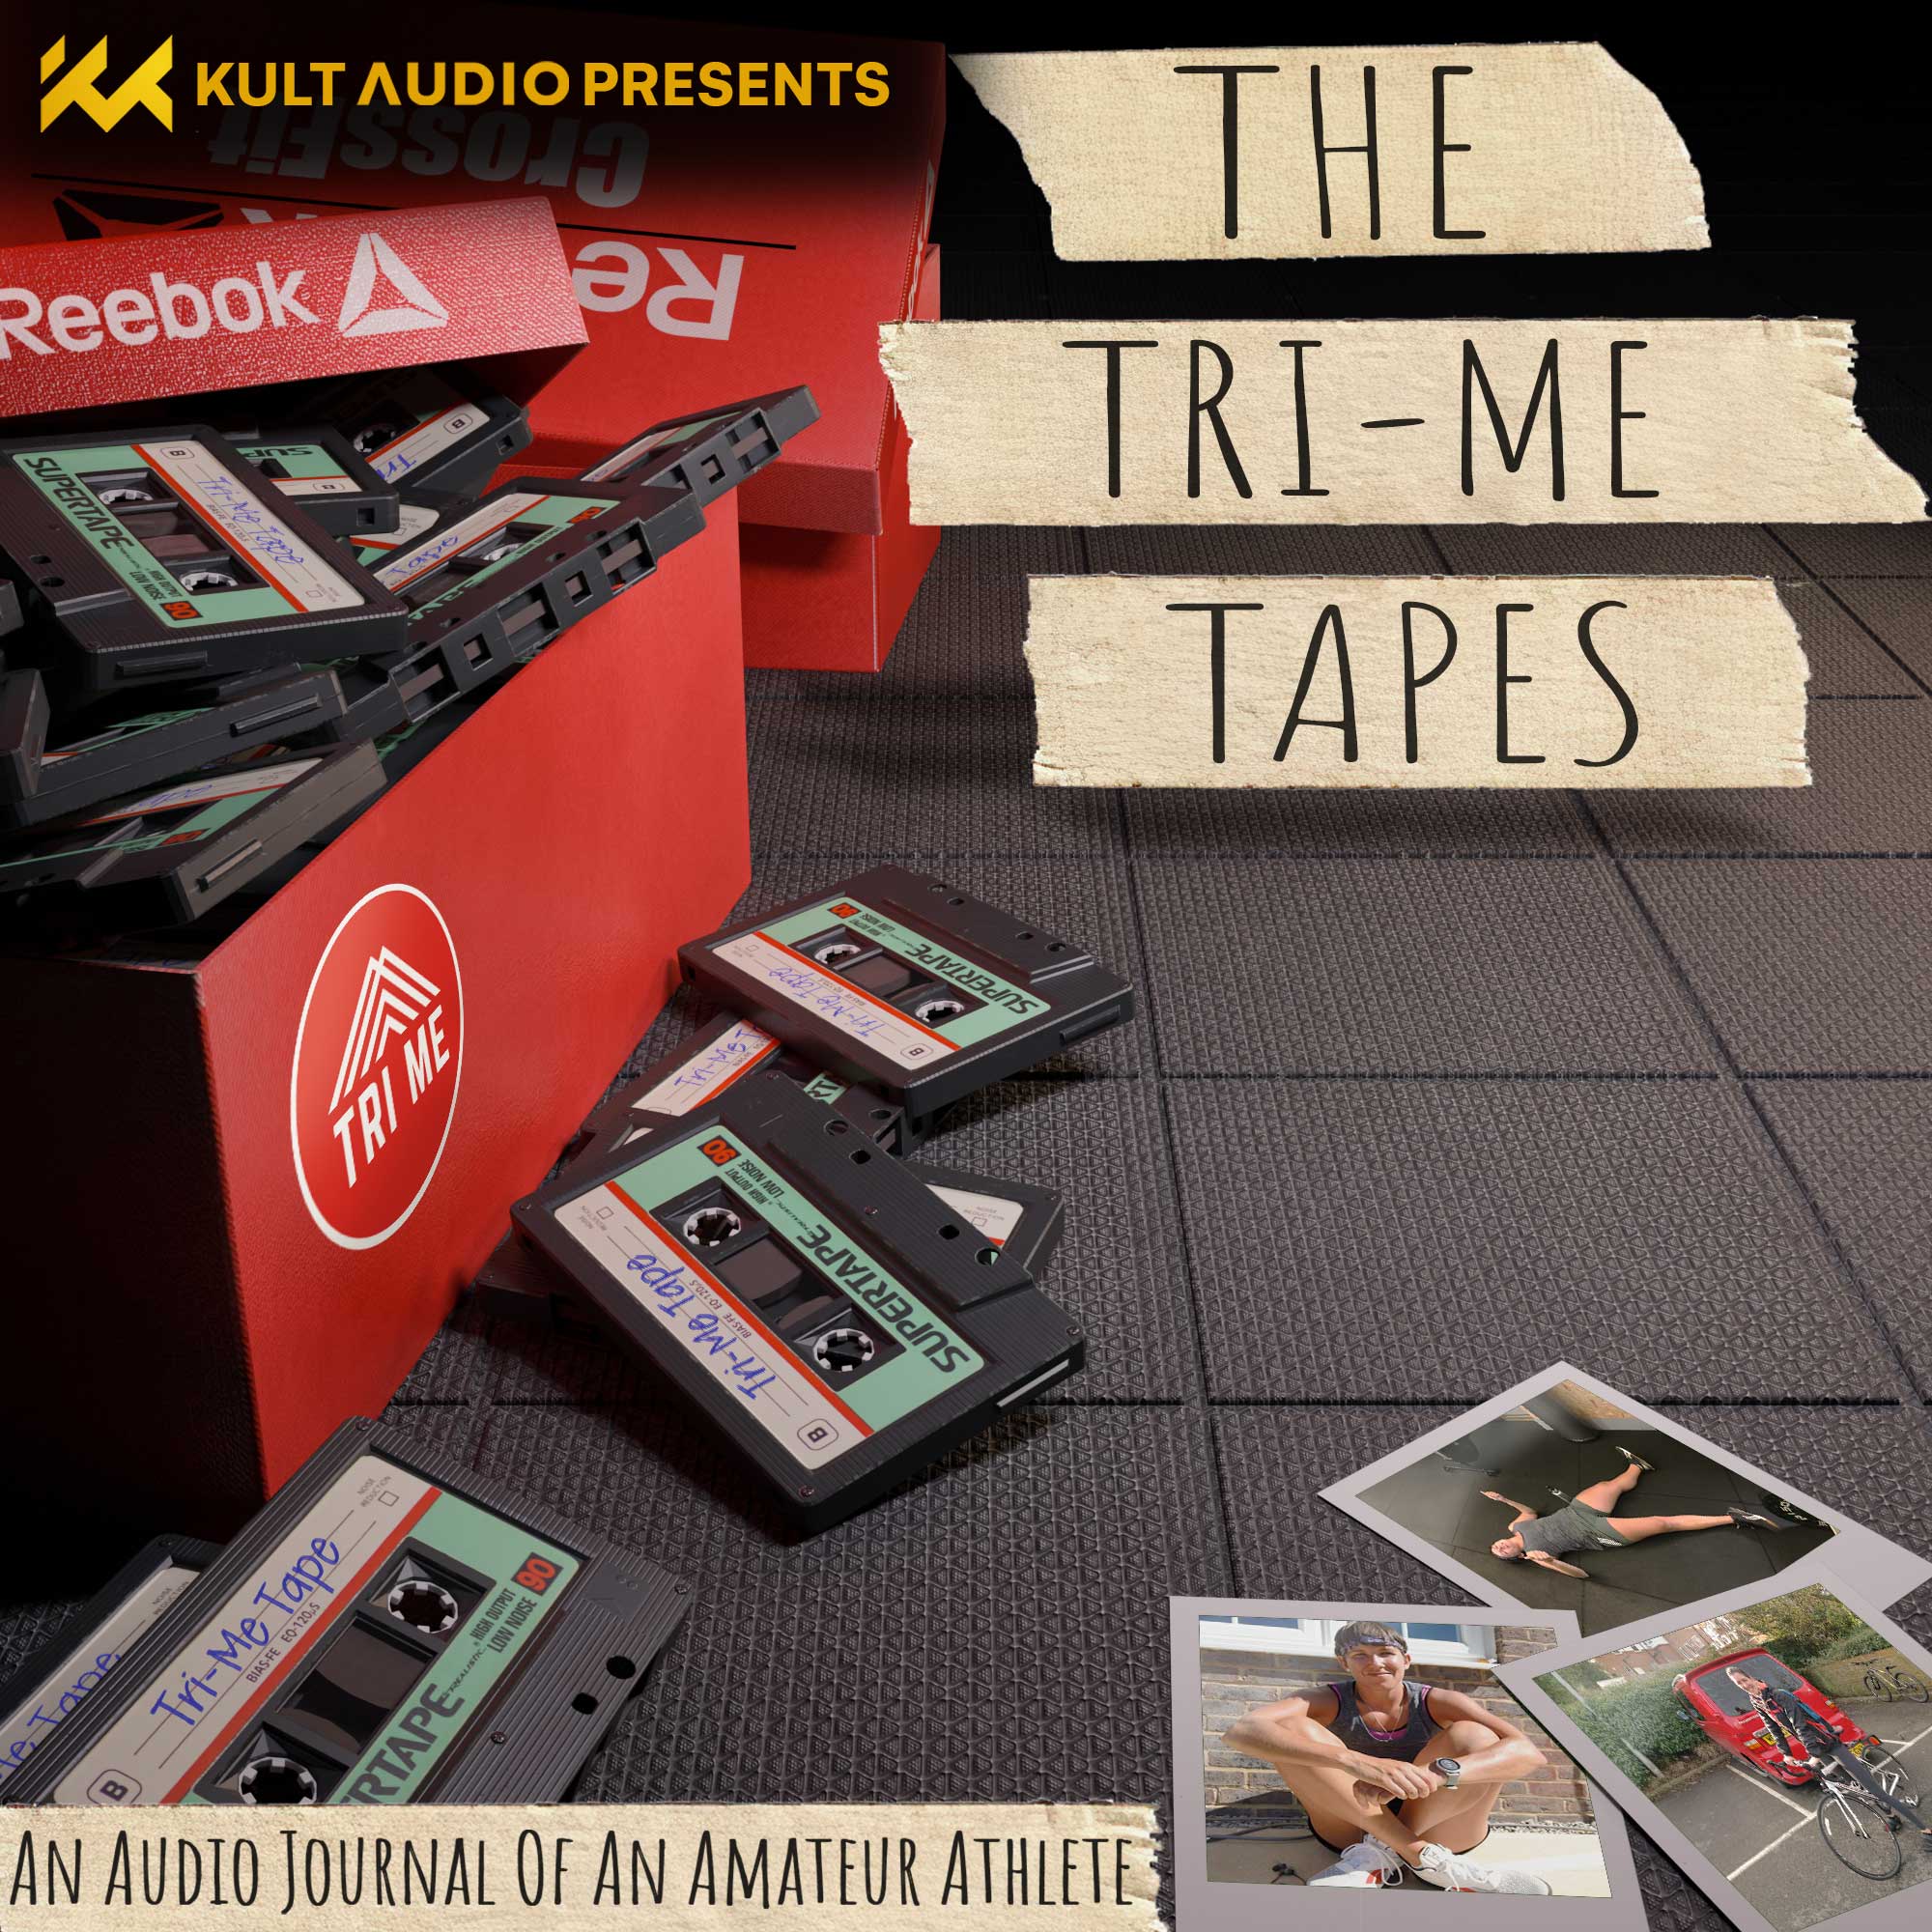 Artwork for podcast The Tri-Me Tapes